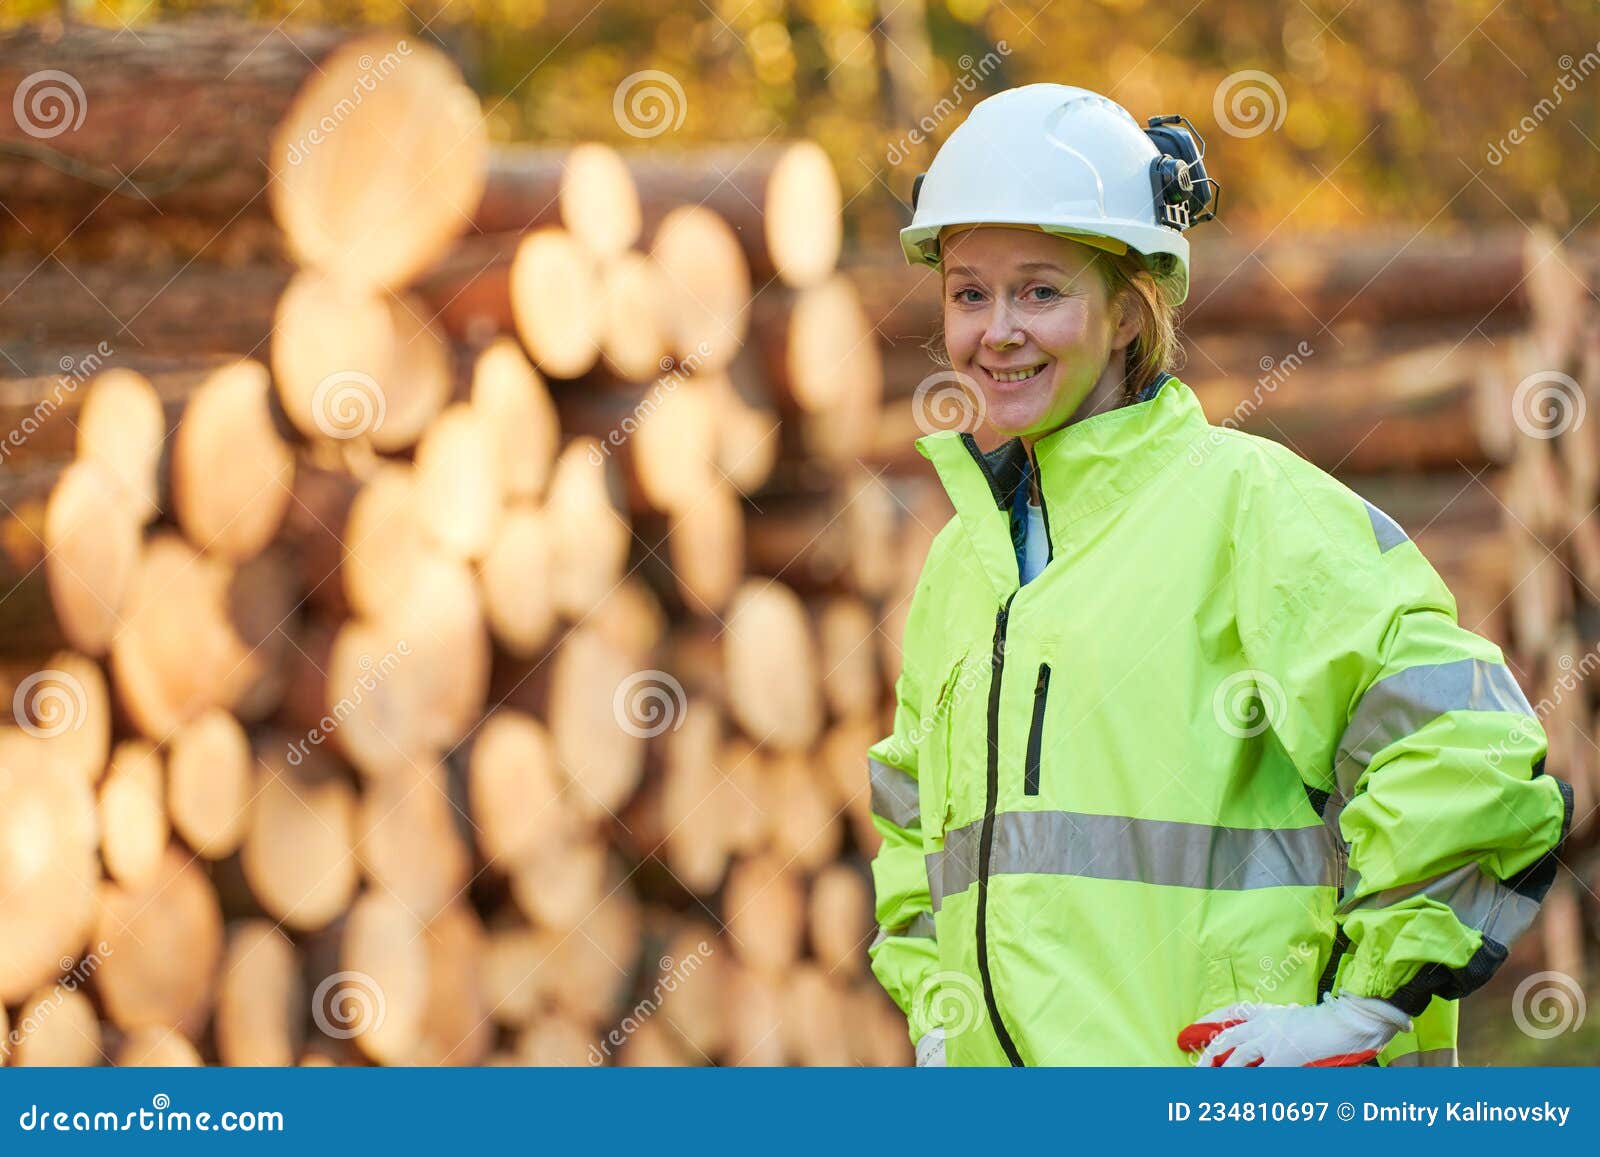 forestry worker in protective workwear in front of wood lumber cut tree